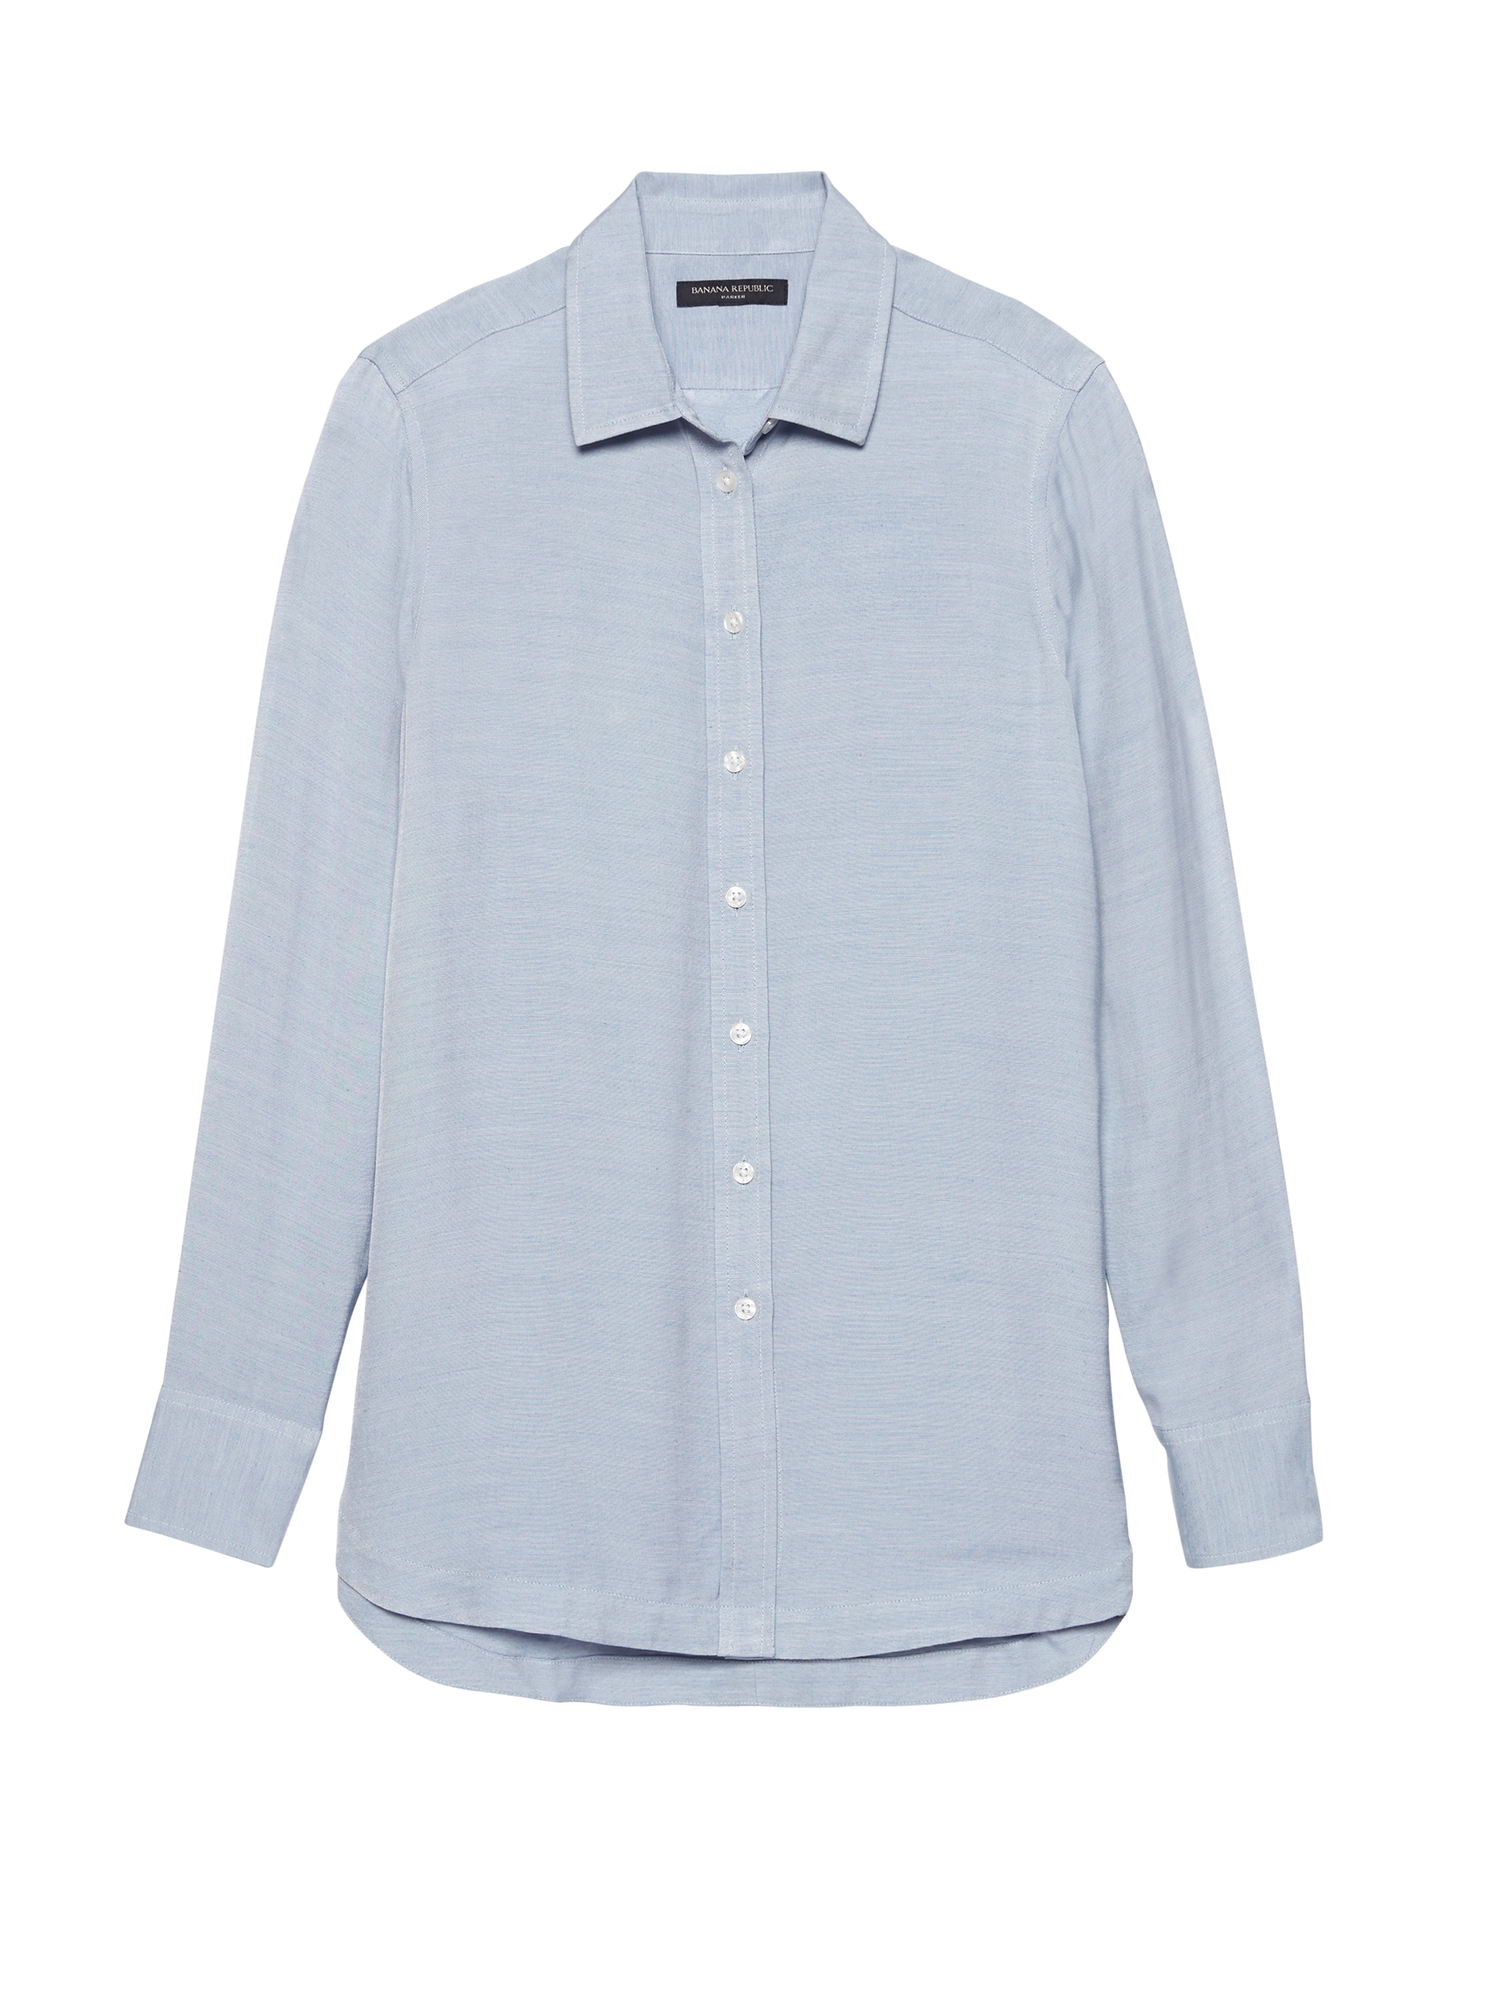 Parker Tunic-Fit Solid Shirt